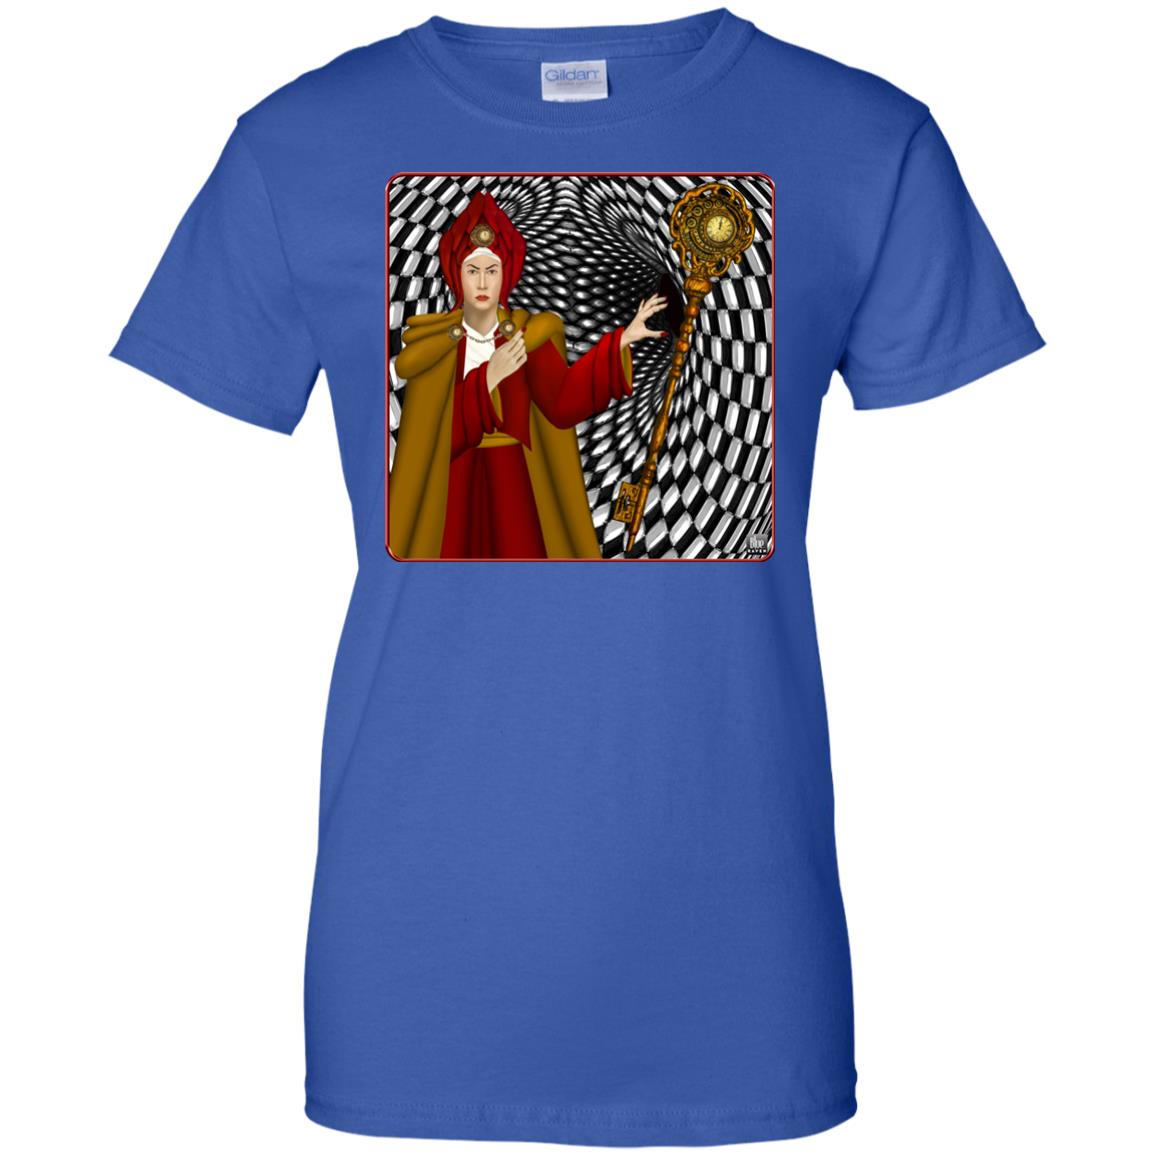 PORTRAIT OF THE RED QUEEN - Women's Relaxed Fit T-Shirt